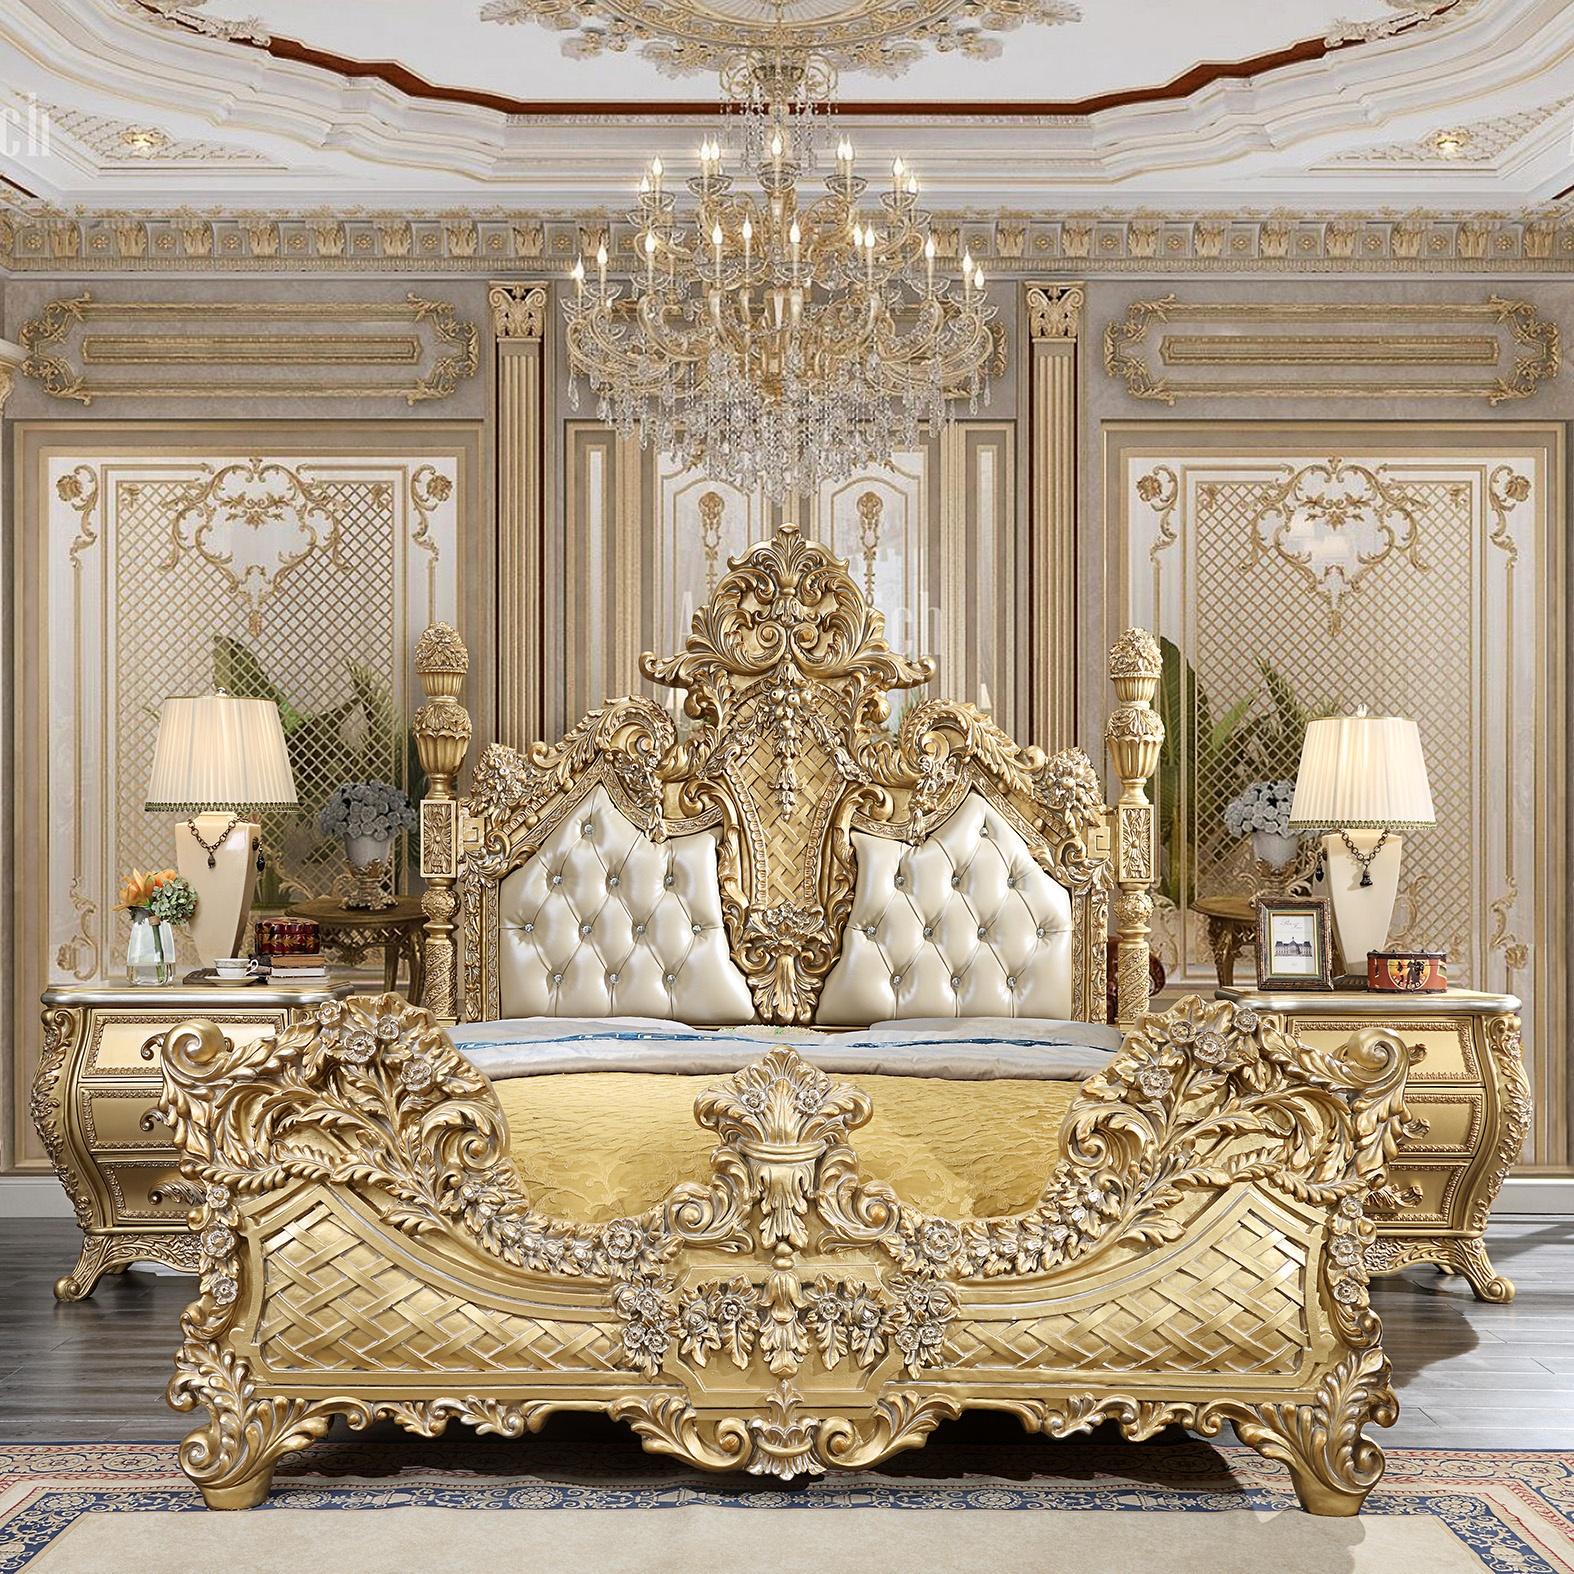 Traditional Panel Bedroom Set HD-1801 HD-EK1801-3PC in Metallic, Gold Finish, Antique Leather